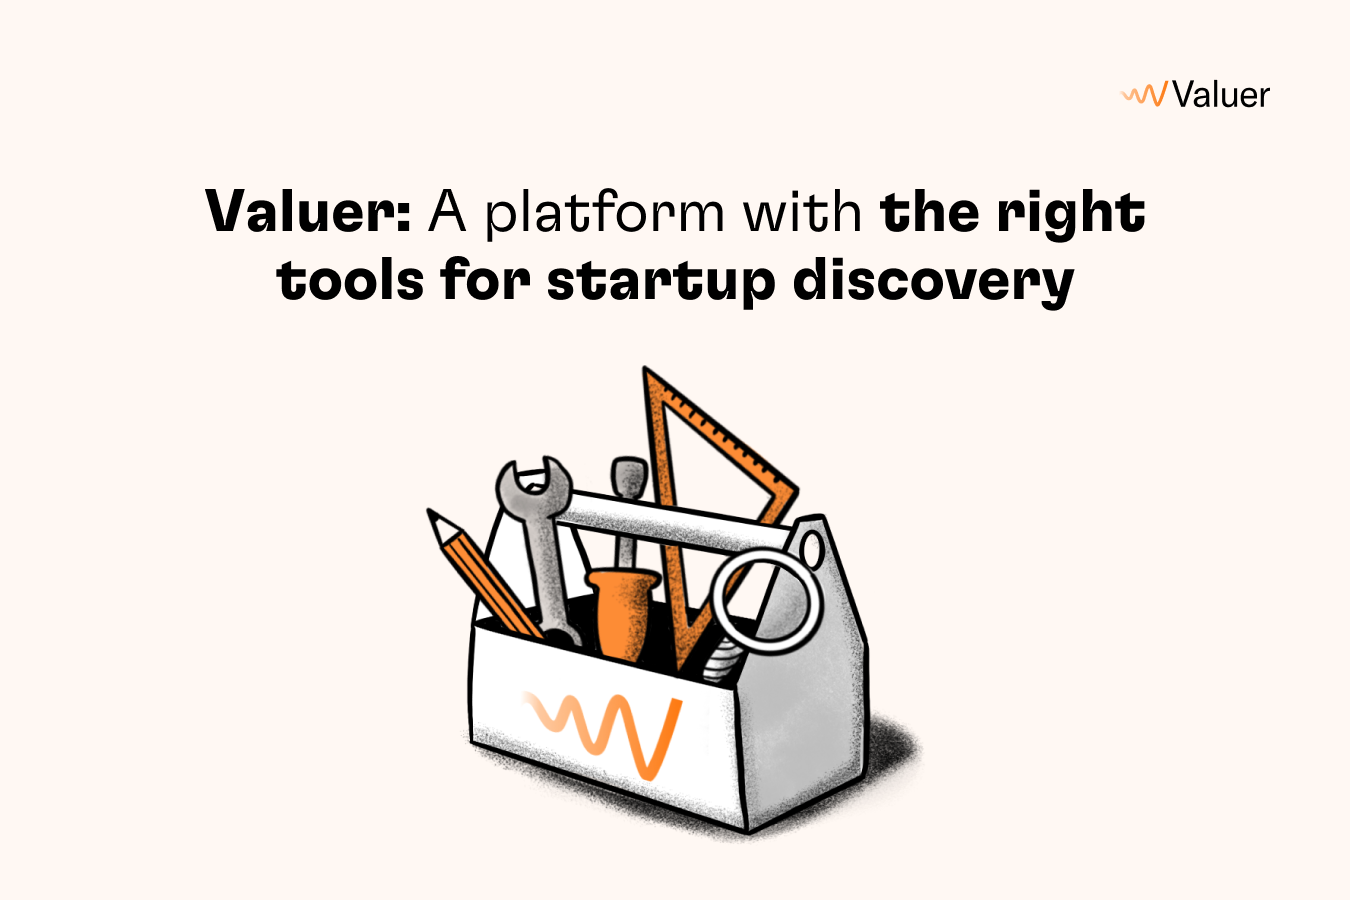 Valuer a platform with the right tools for startup discovery